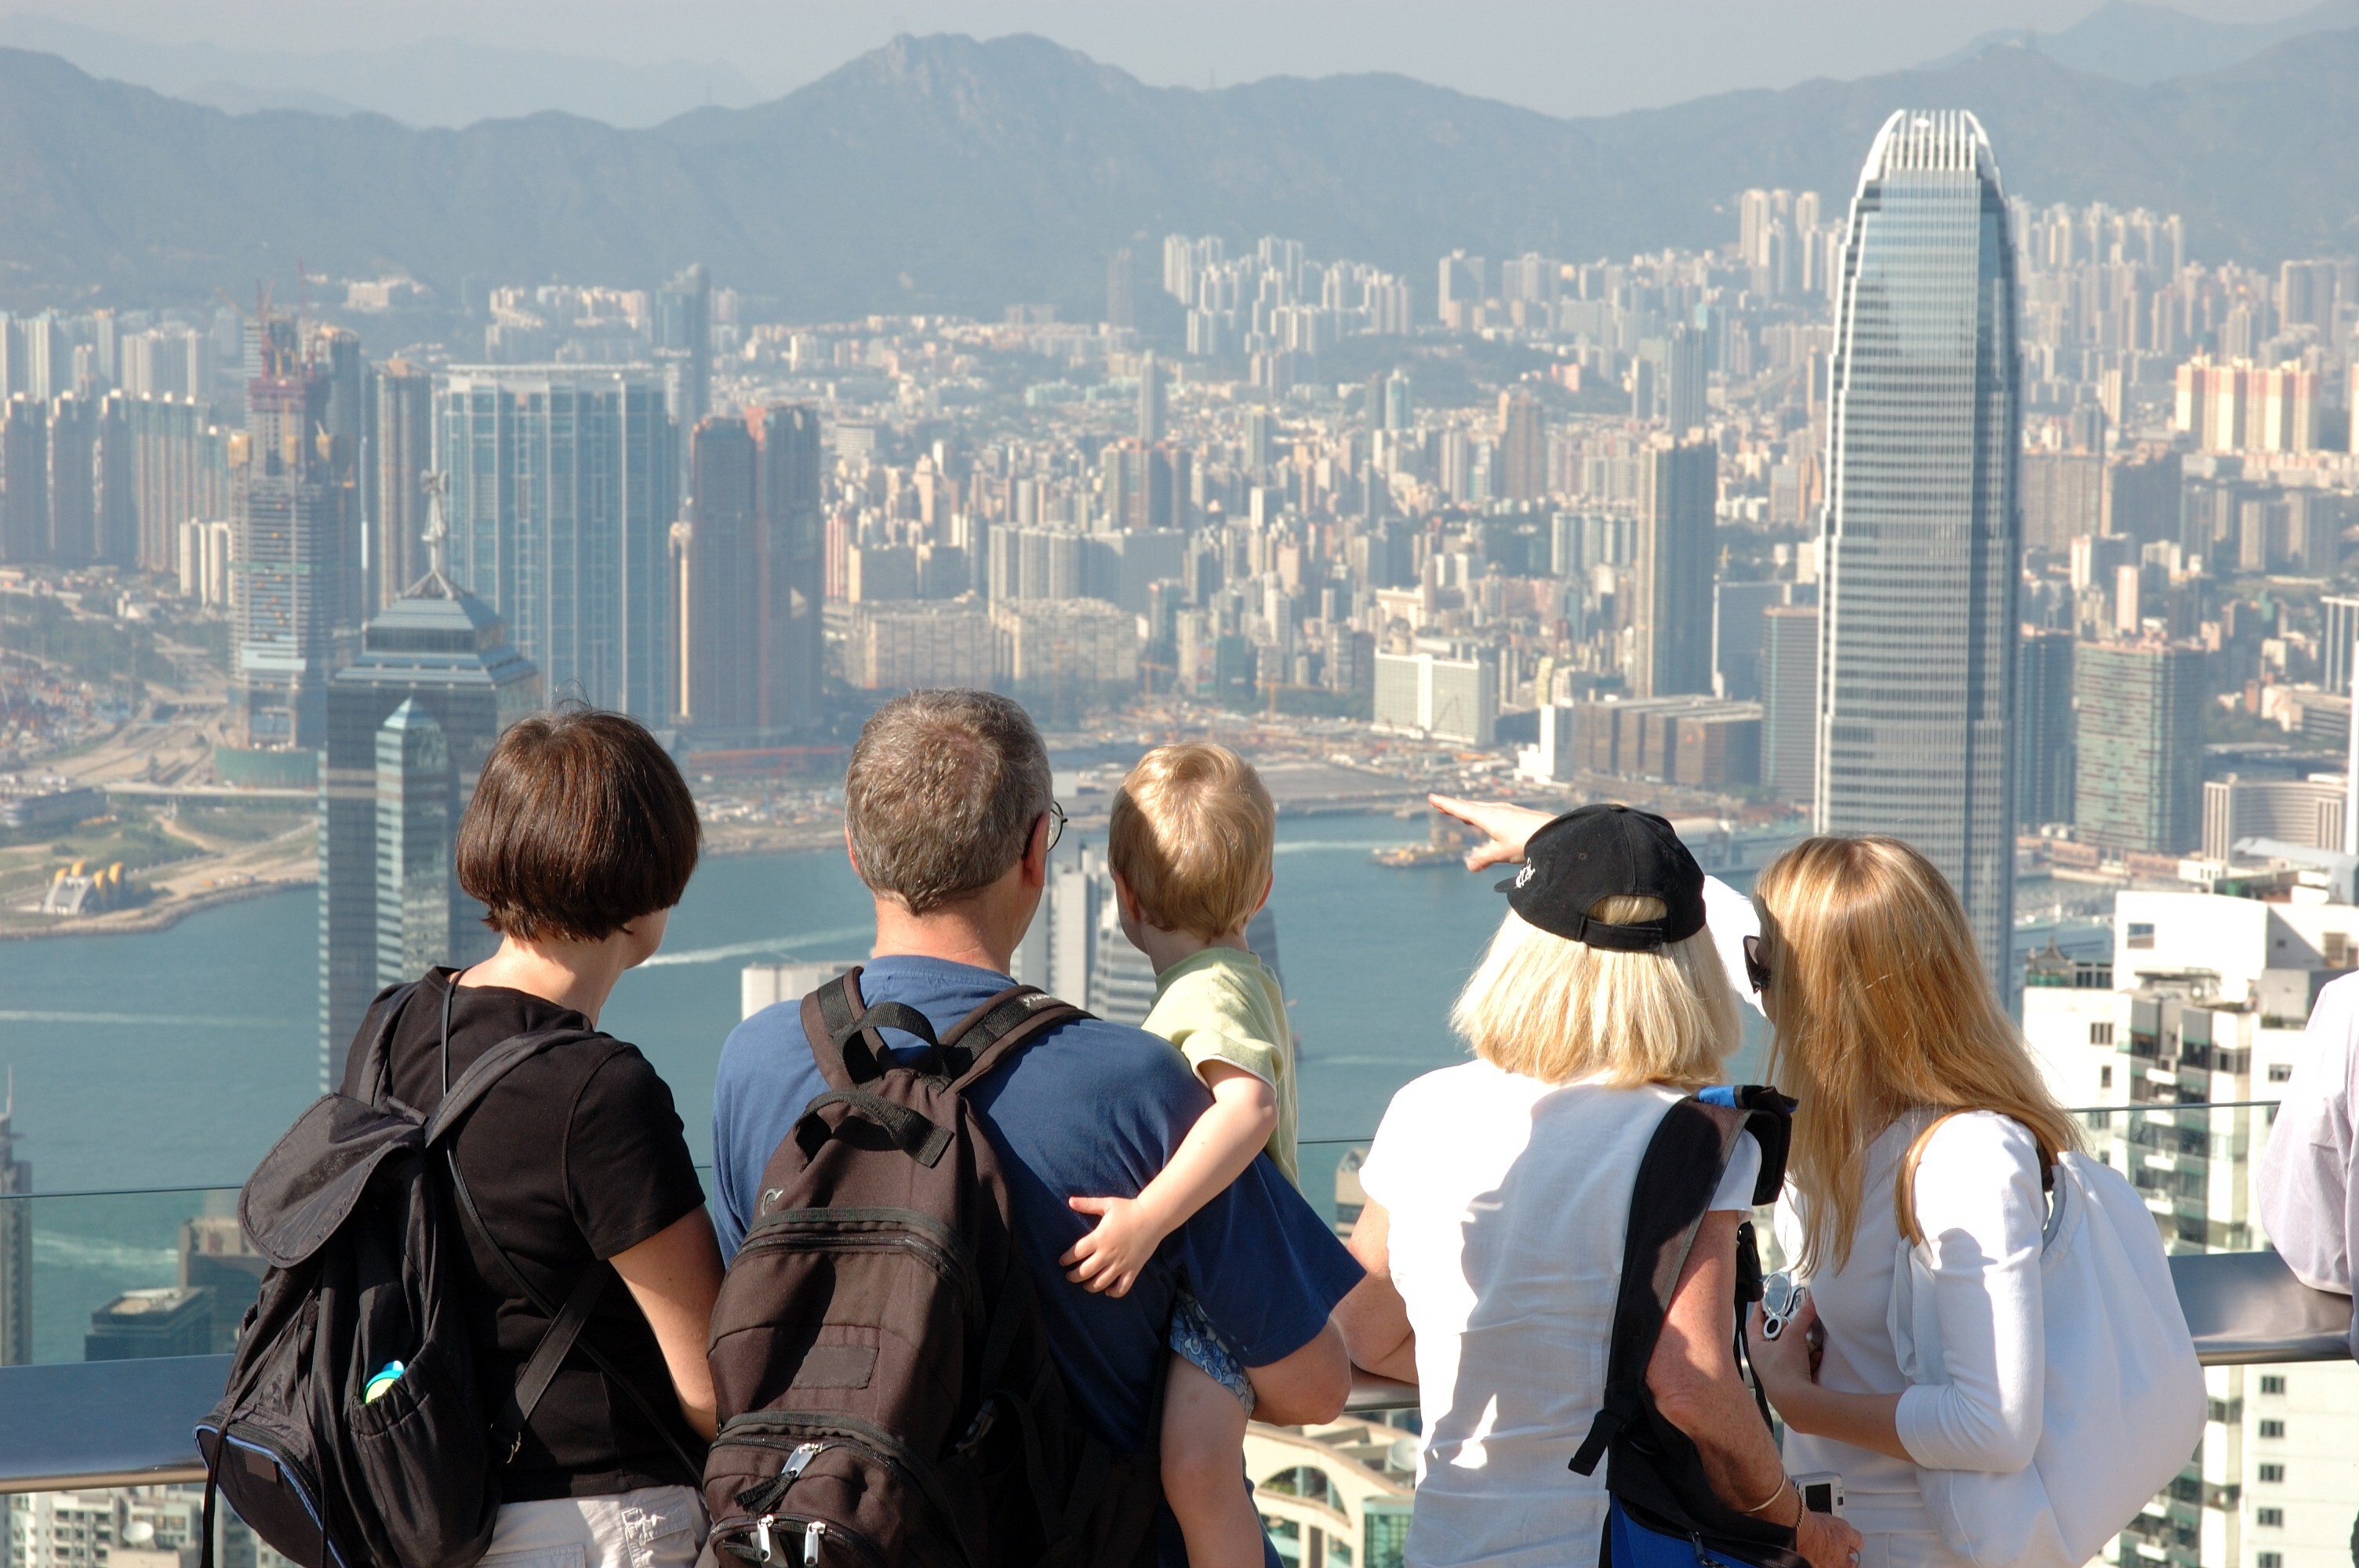 The economic slump affecting Hong Kong and the rest of world has highlighted the need for families to make financial plans well ahead of time to protect them and future generations. Photo: Shutterstock